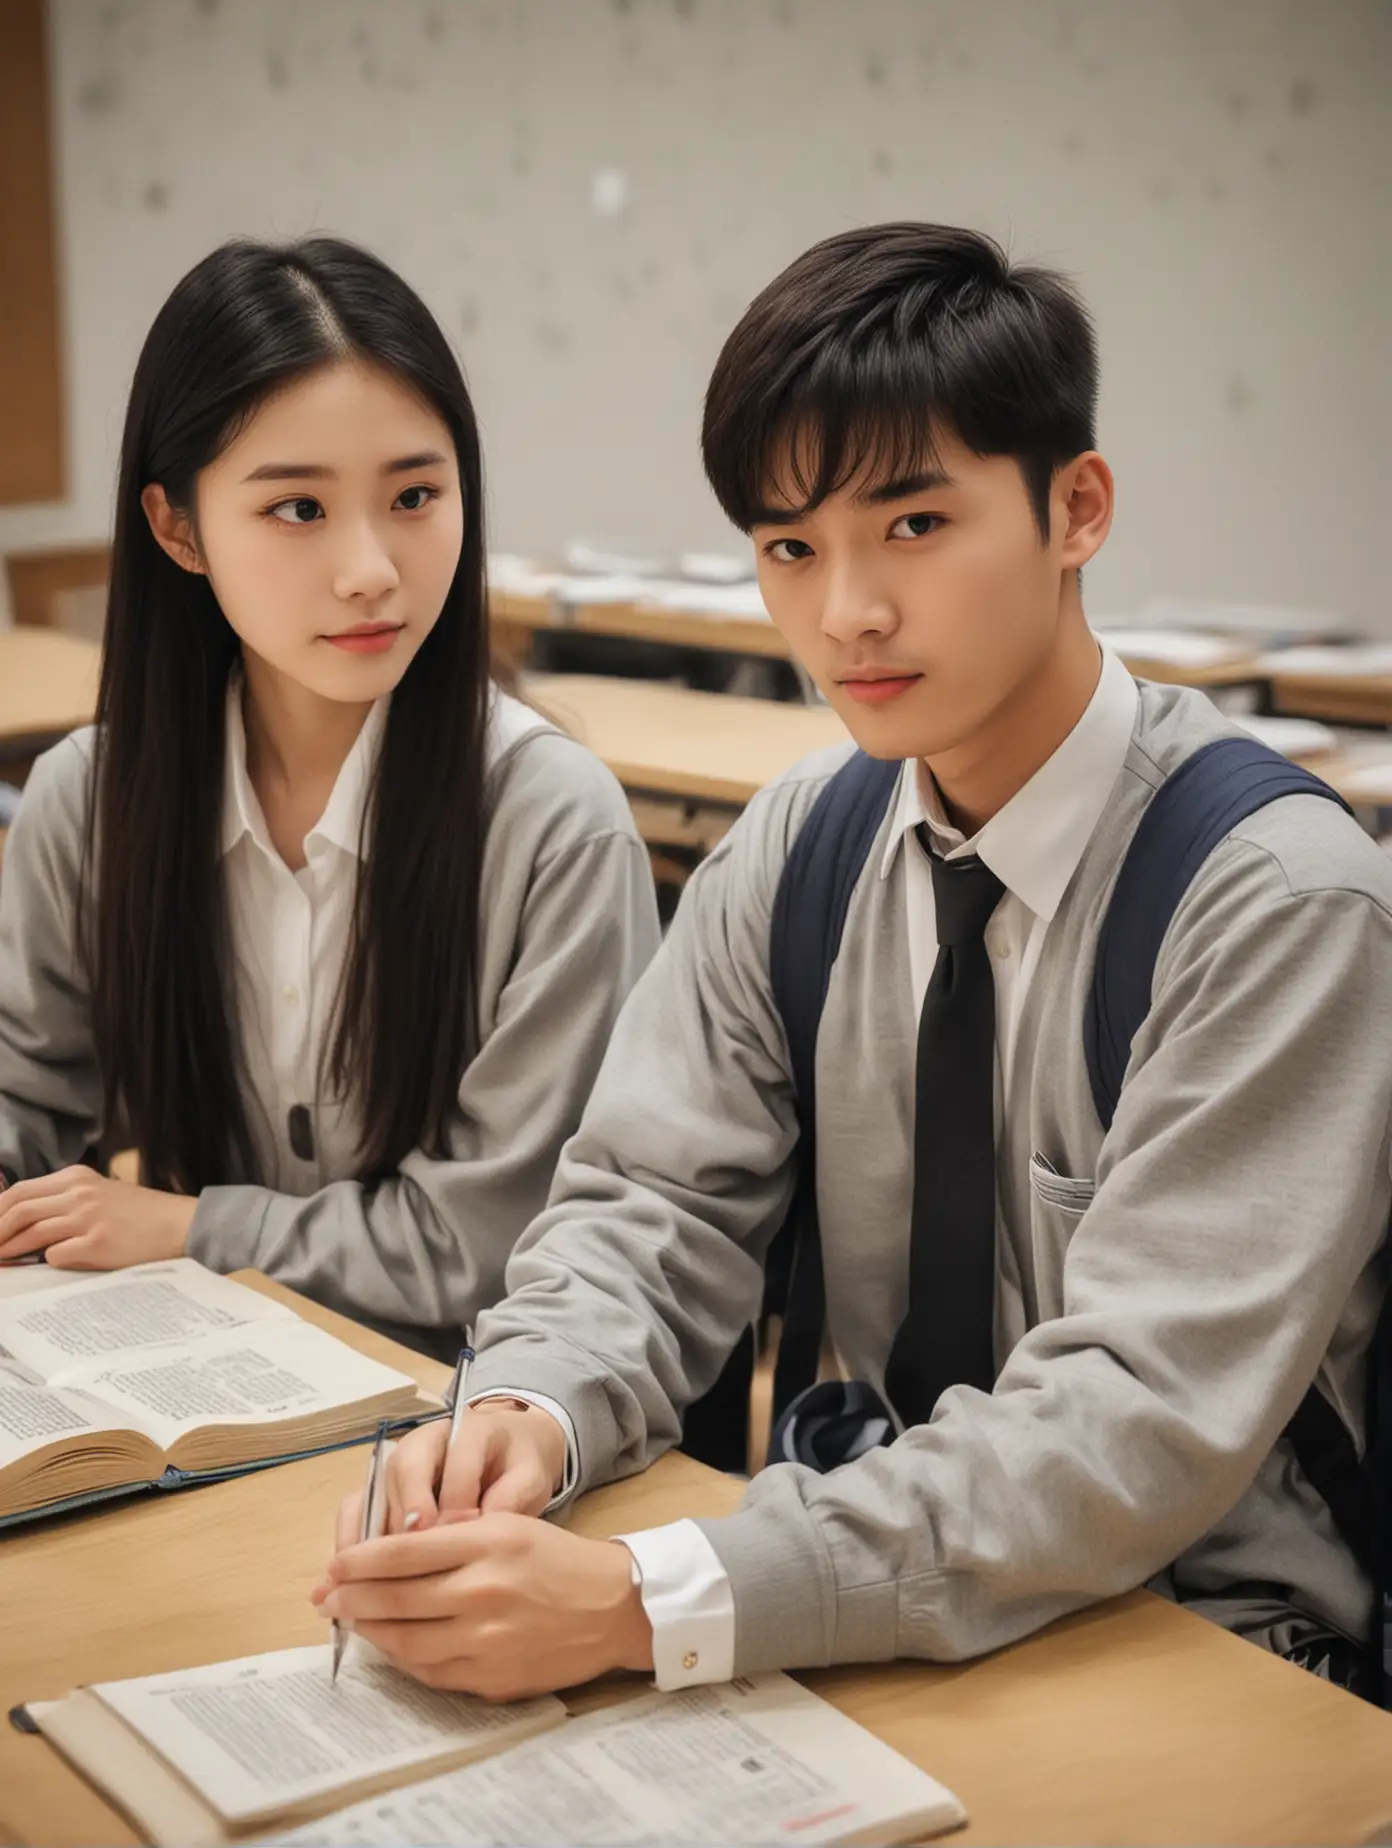 Chinese-Male-and-Female-Students-Studying-Together-in-Classroom